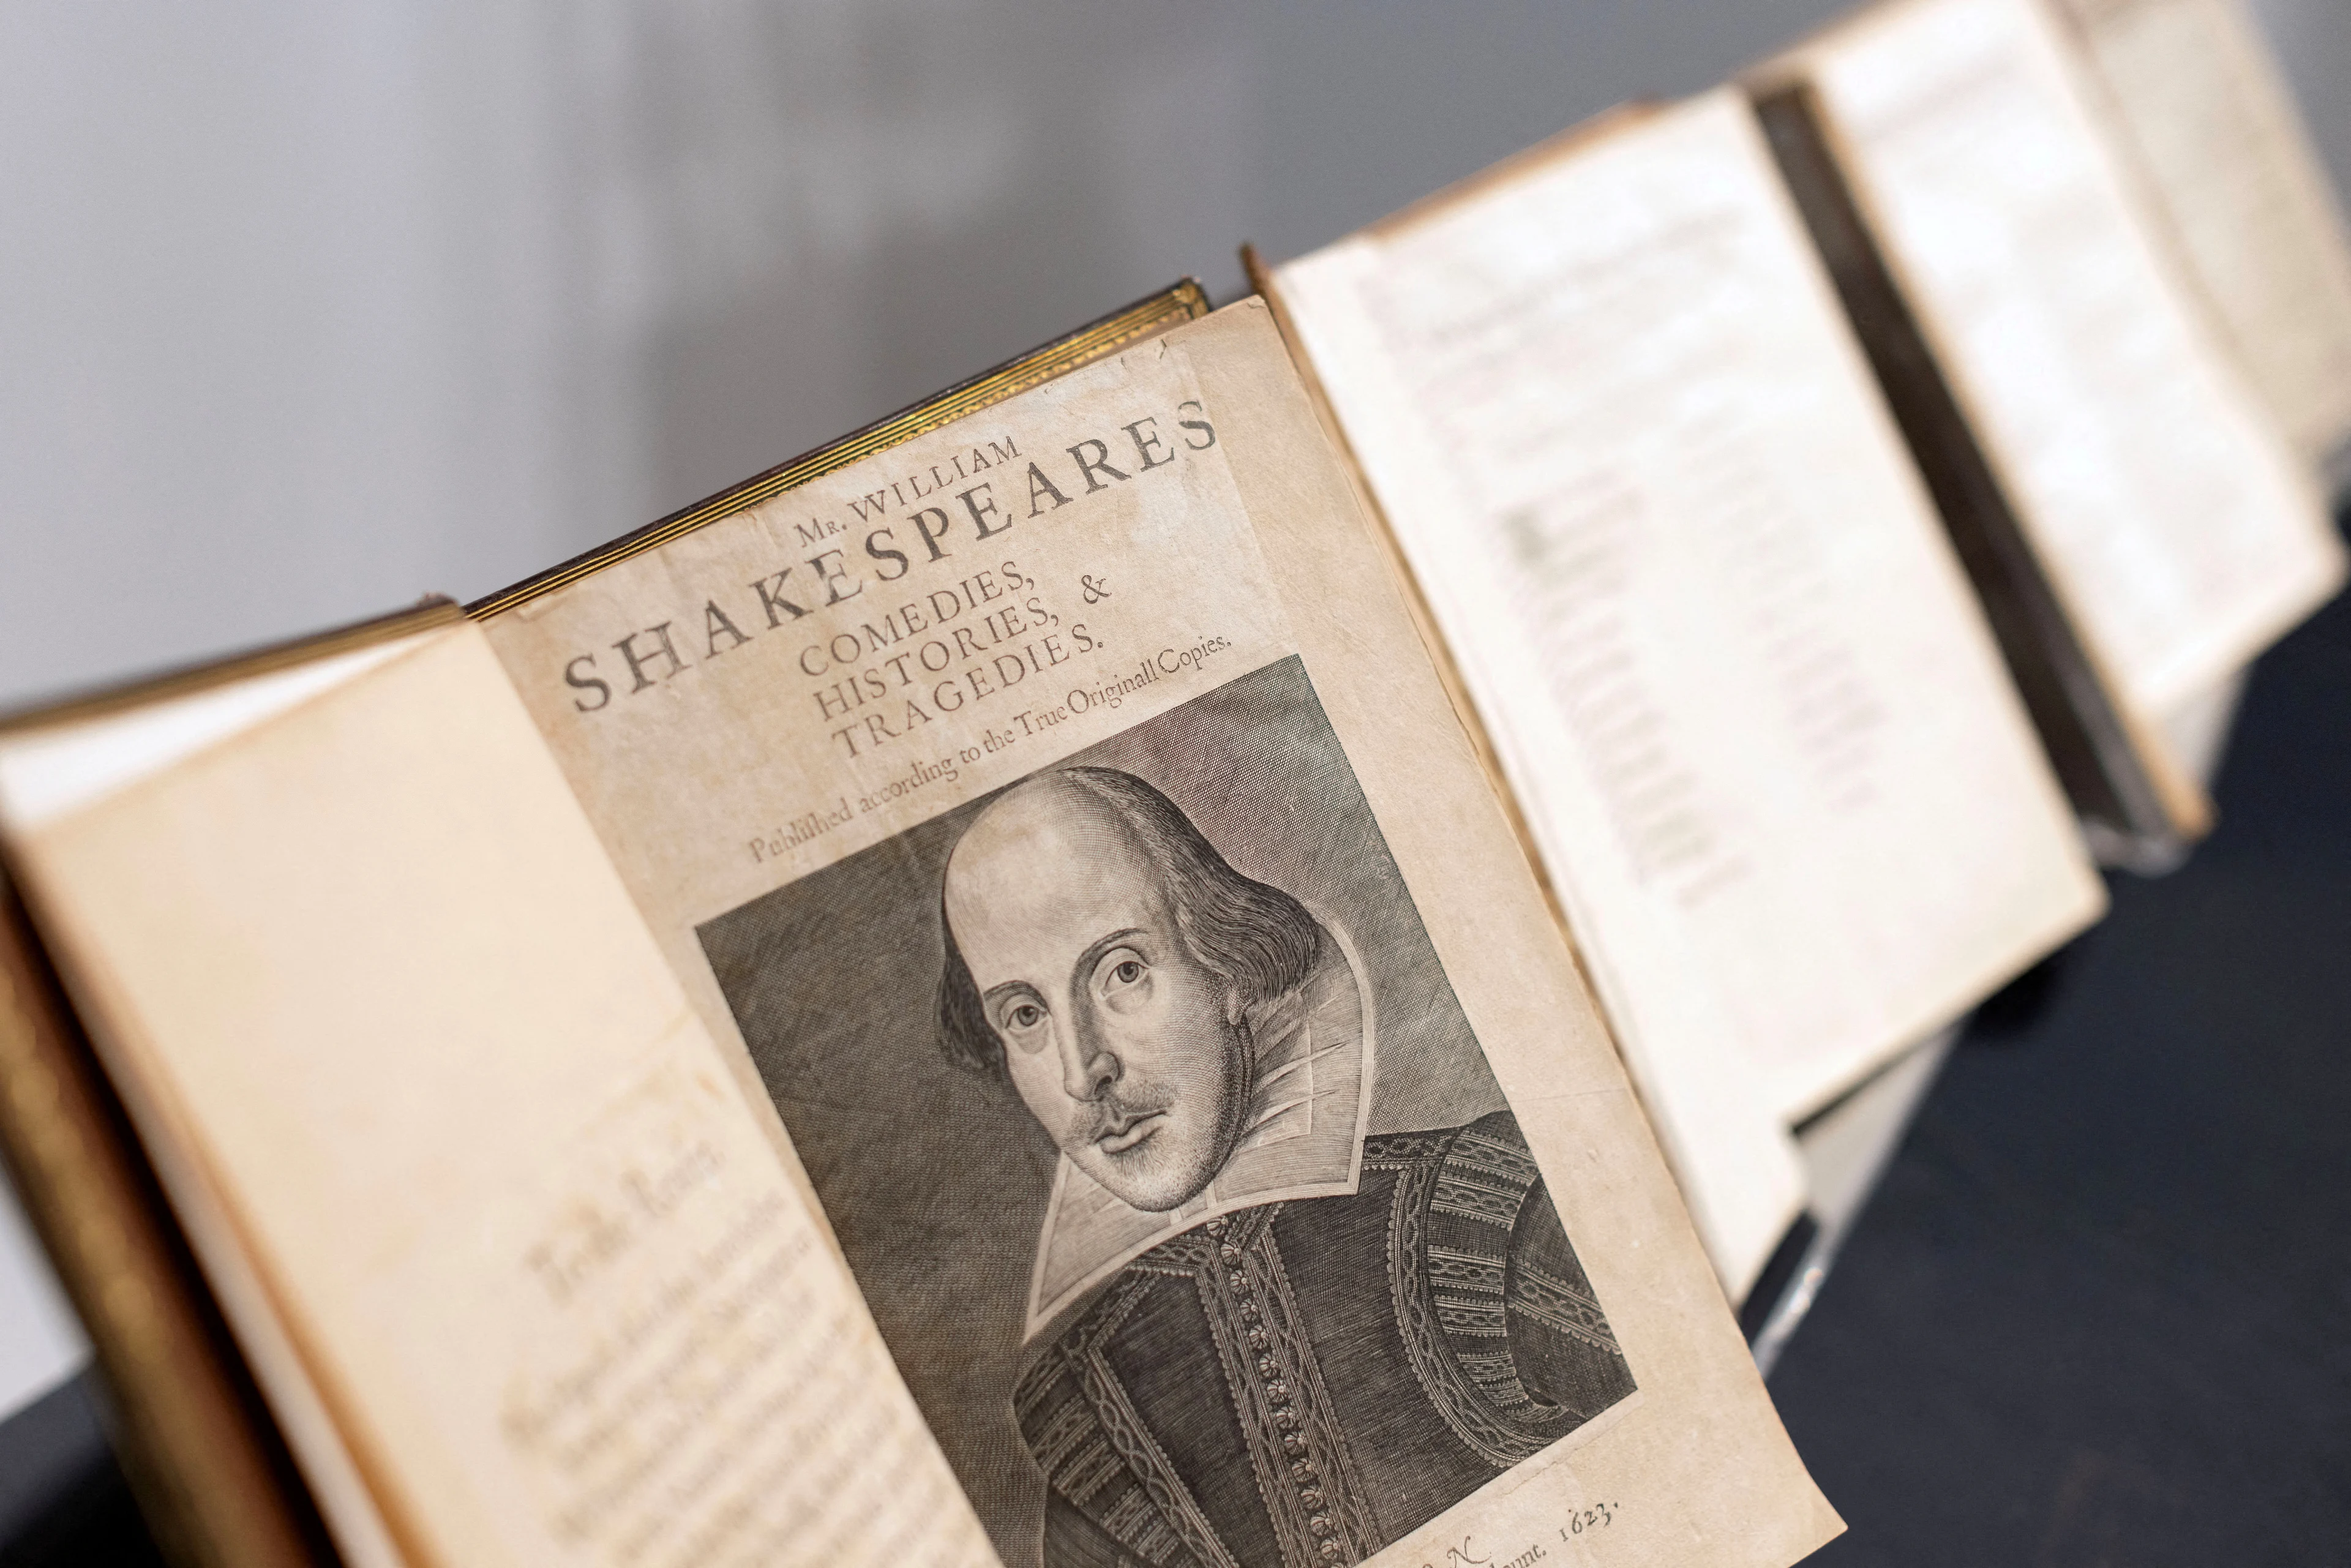 REUTERS: FILE PHOTO: William Shakespeare's First Folio on display at Christies in London, April 24, 2023. Considered one of the most important books, it was published in 1623, the exhibition marks the 400-year anniversary. REUTERS/Anna Gordon/File Photo